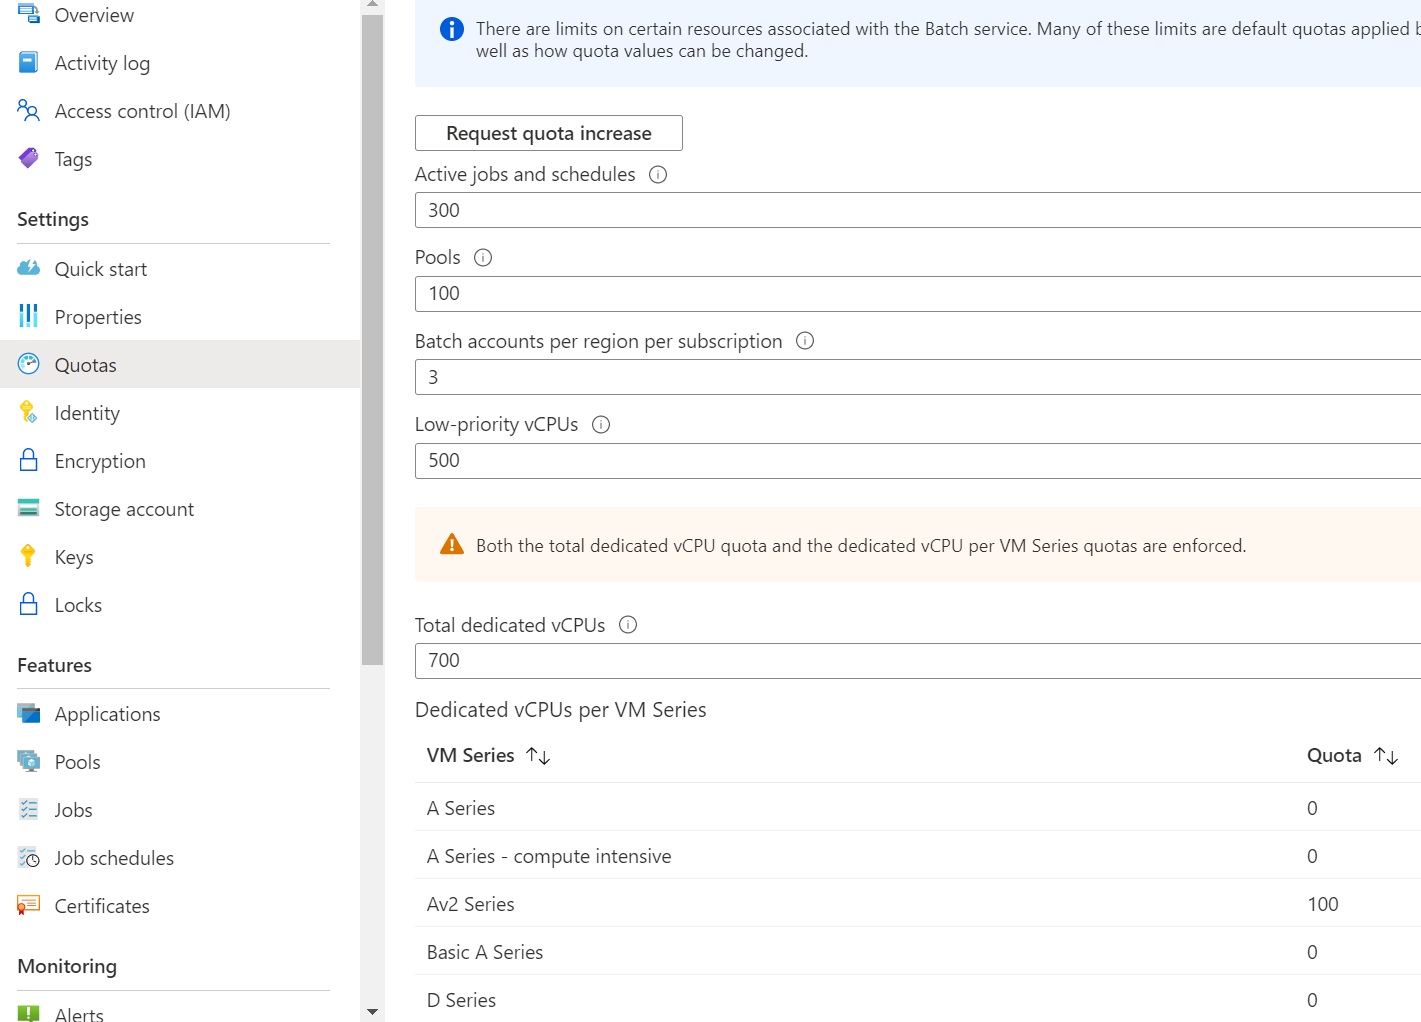 Screenshot of Batch account's quota page in the Azure portal. Highlights for the quota page in menu, button to request quota increase, and quota column in resource list.